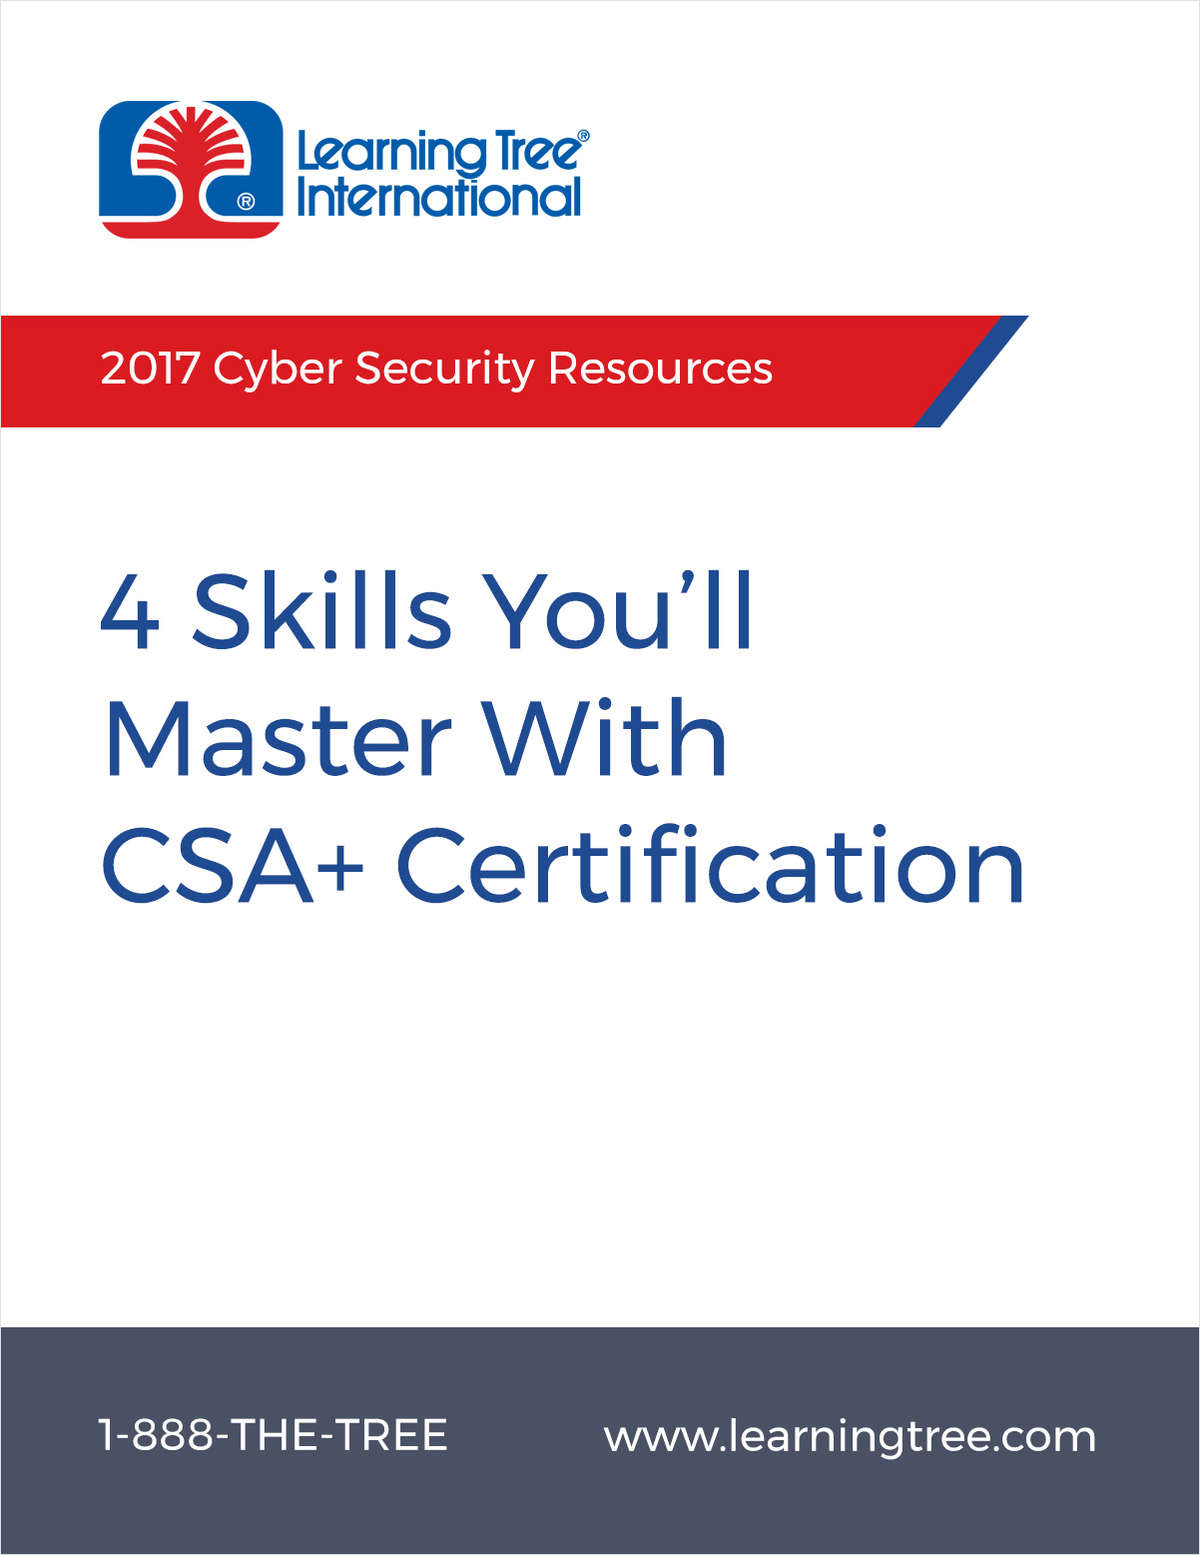 The 4 Skills You Must Master When Becoming CSA+ Certified